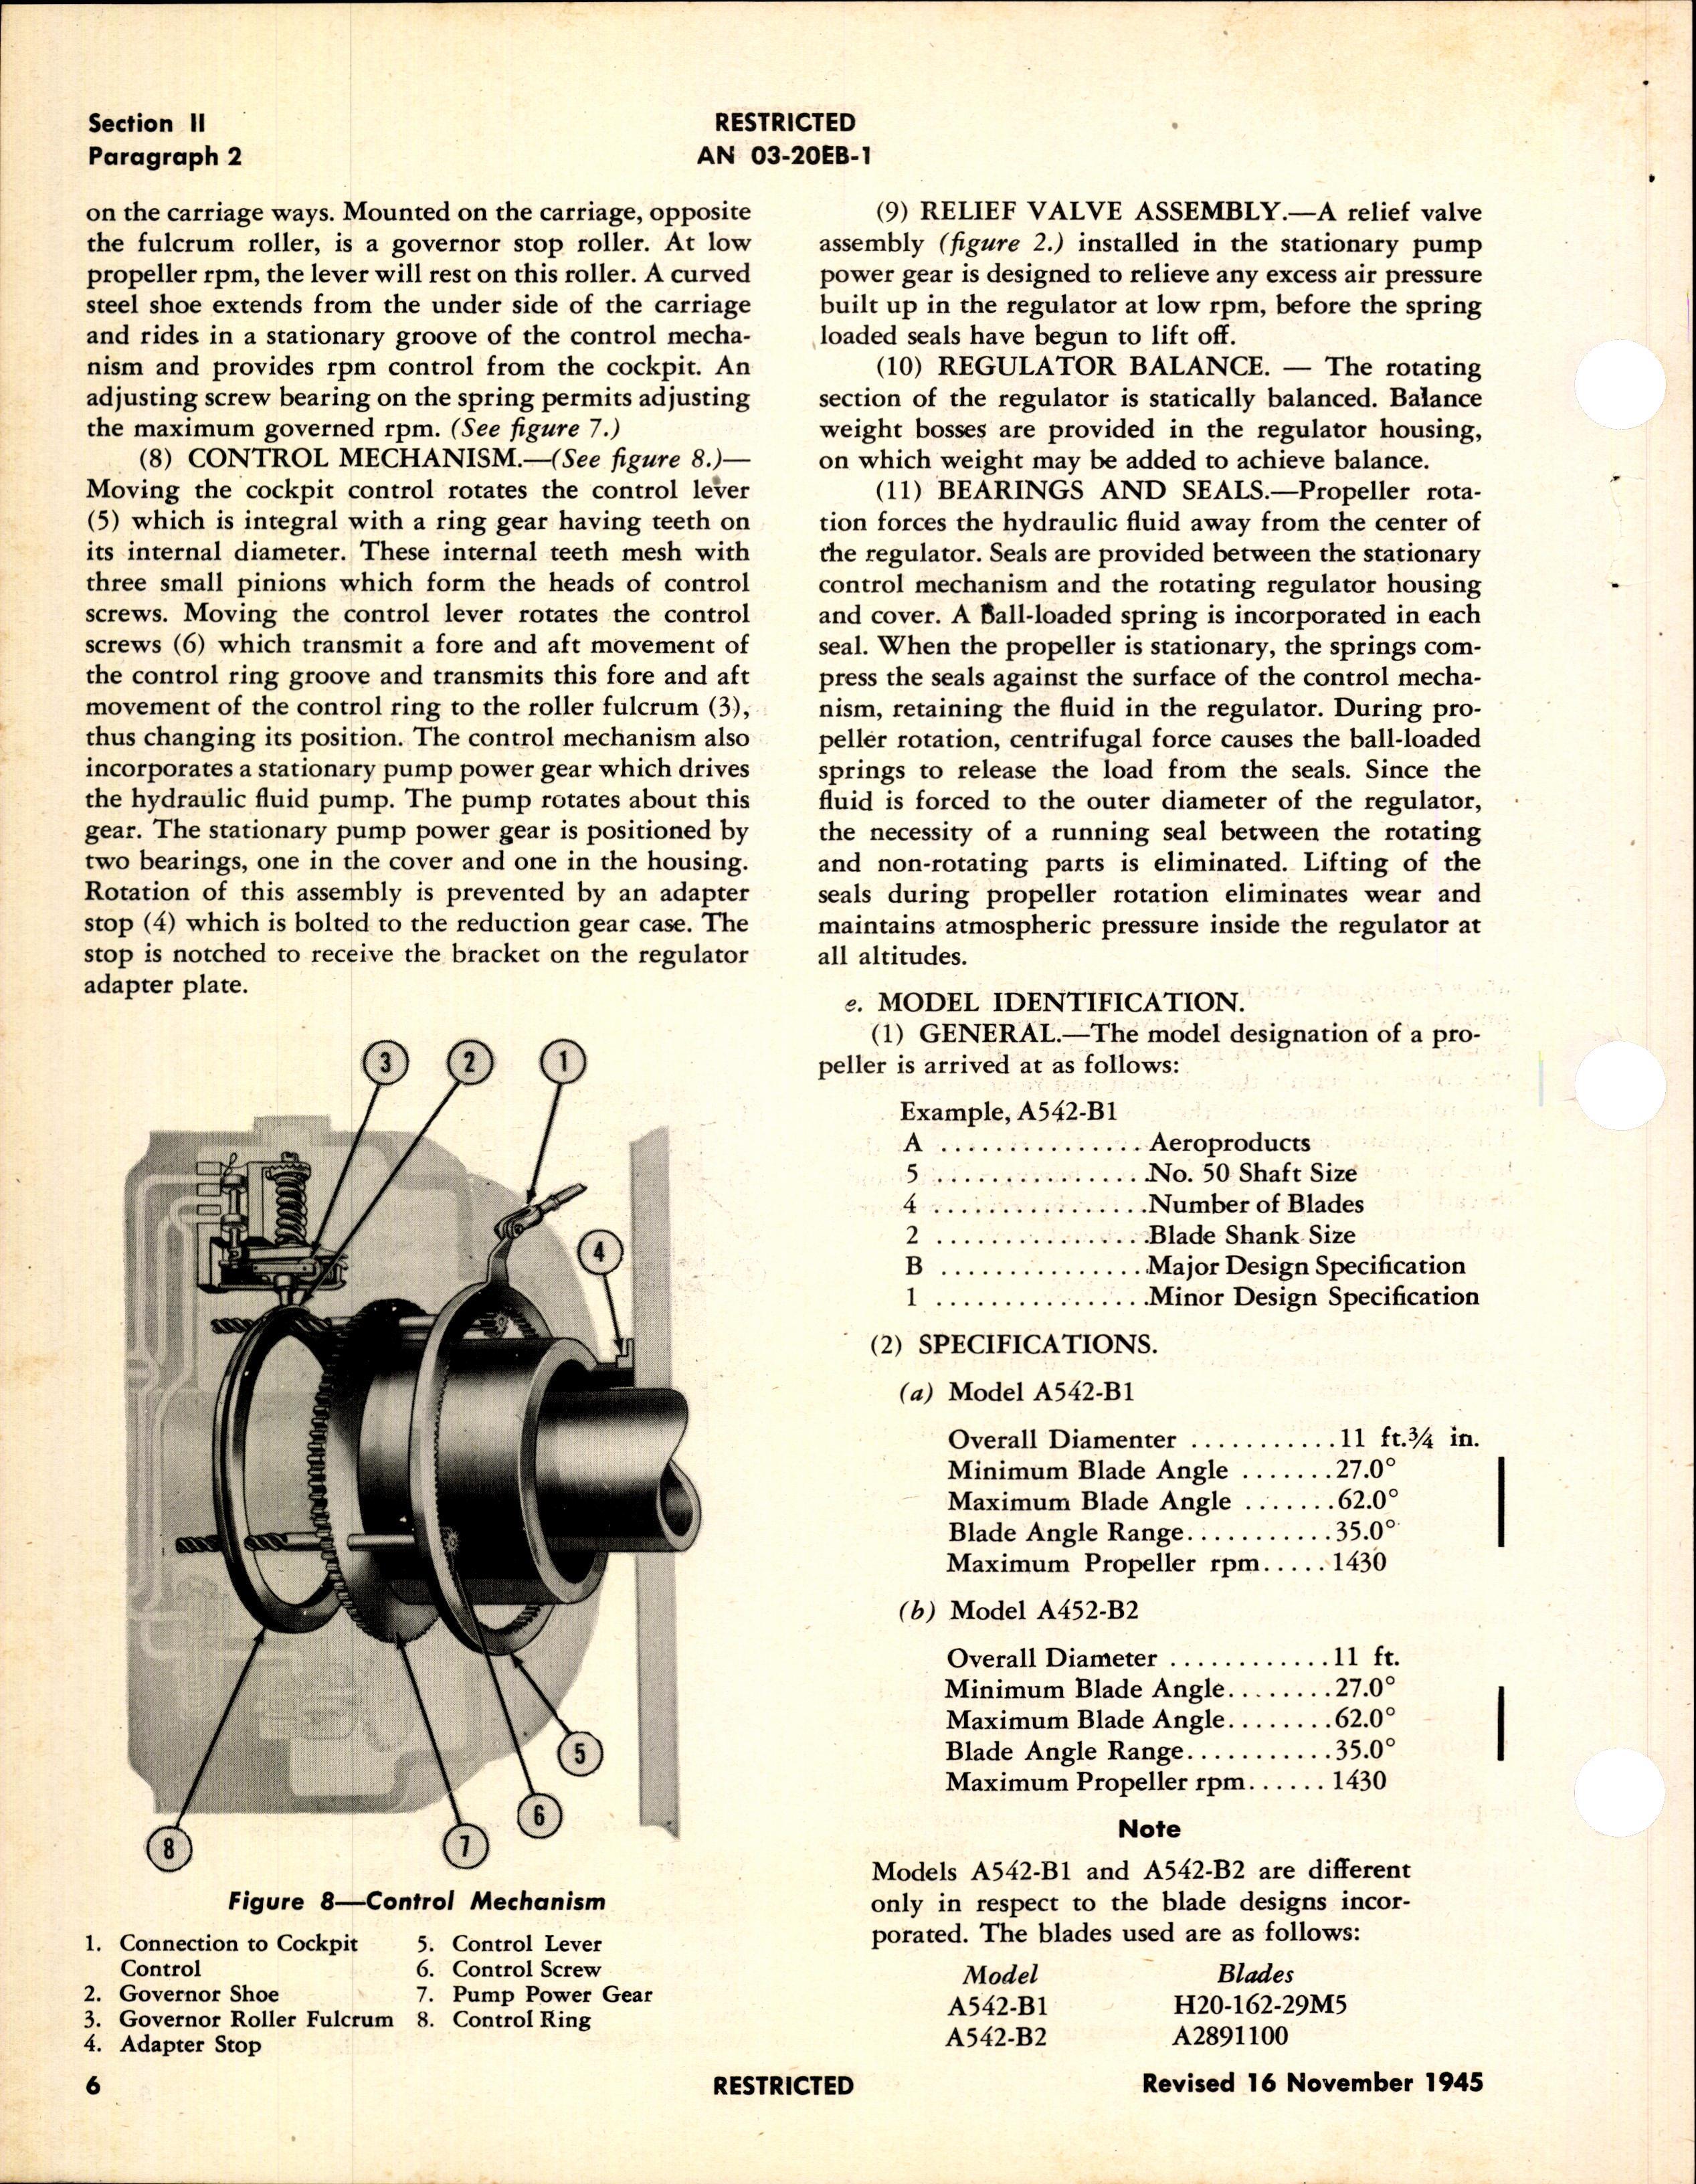 Sample page 6 from AirCorps Library document: Operation, Service, & Overhaul Instructions with Parts Catalog for Hydraulic Controllable Propellers